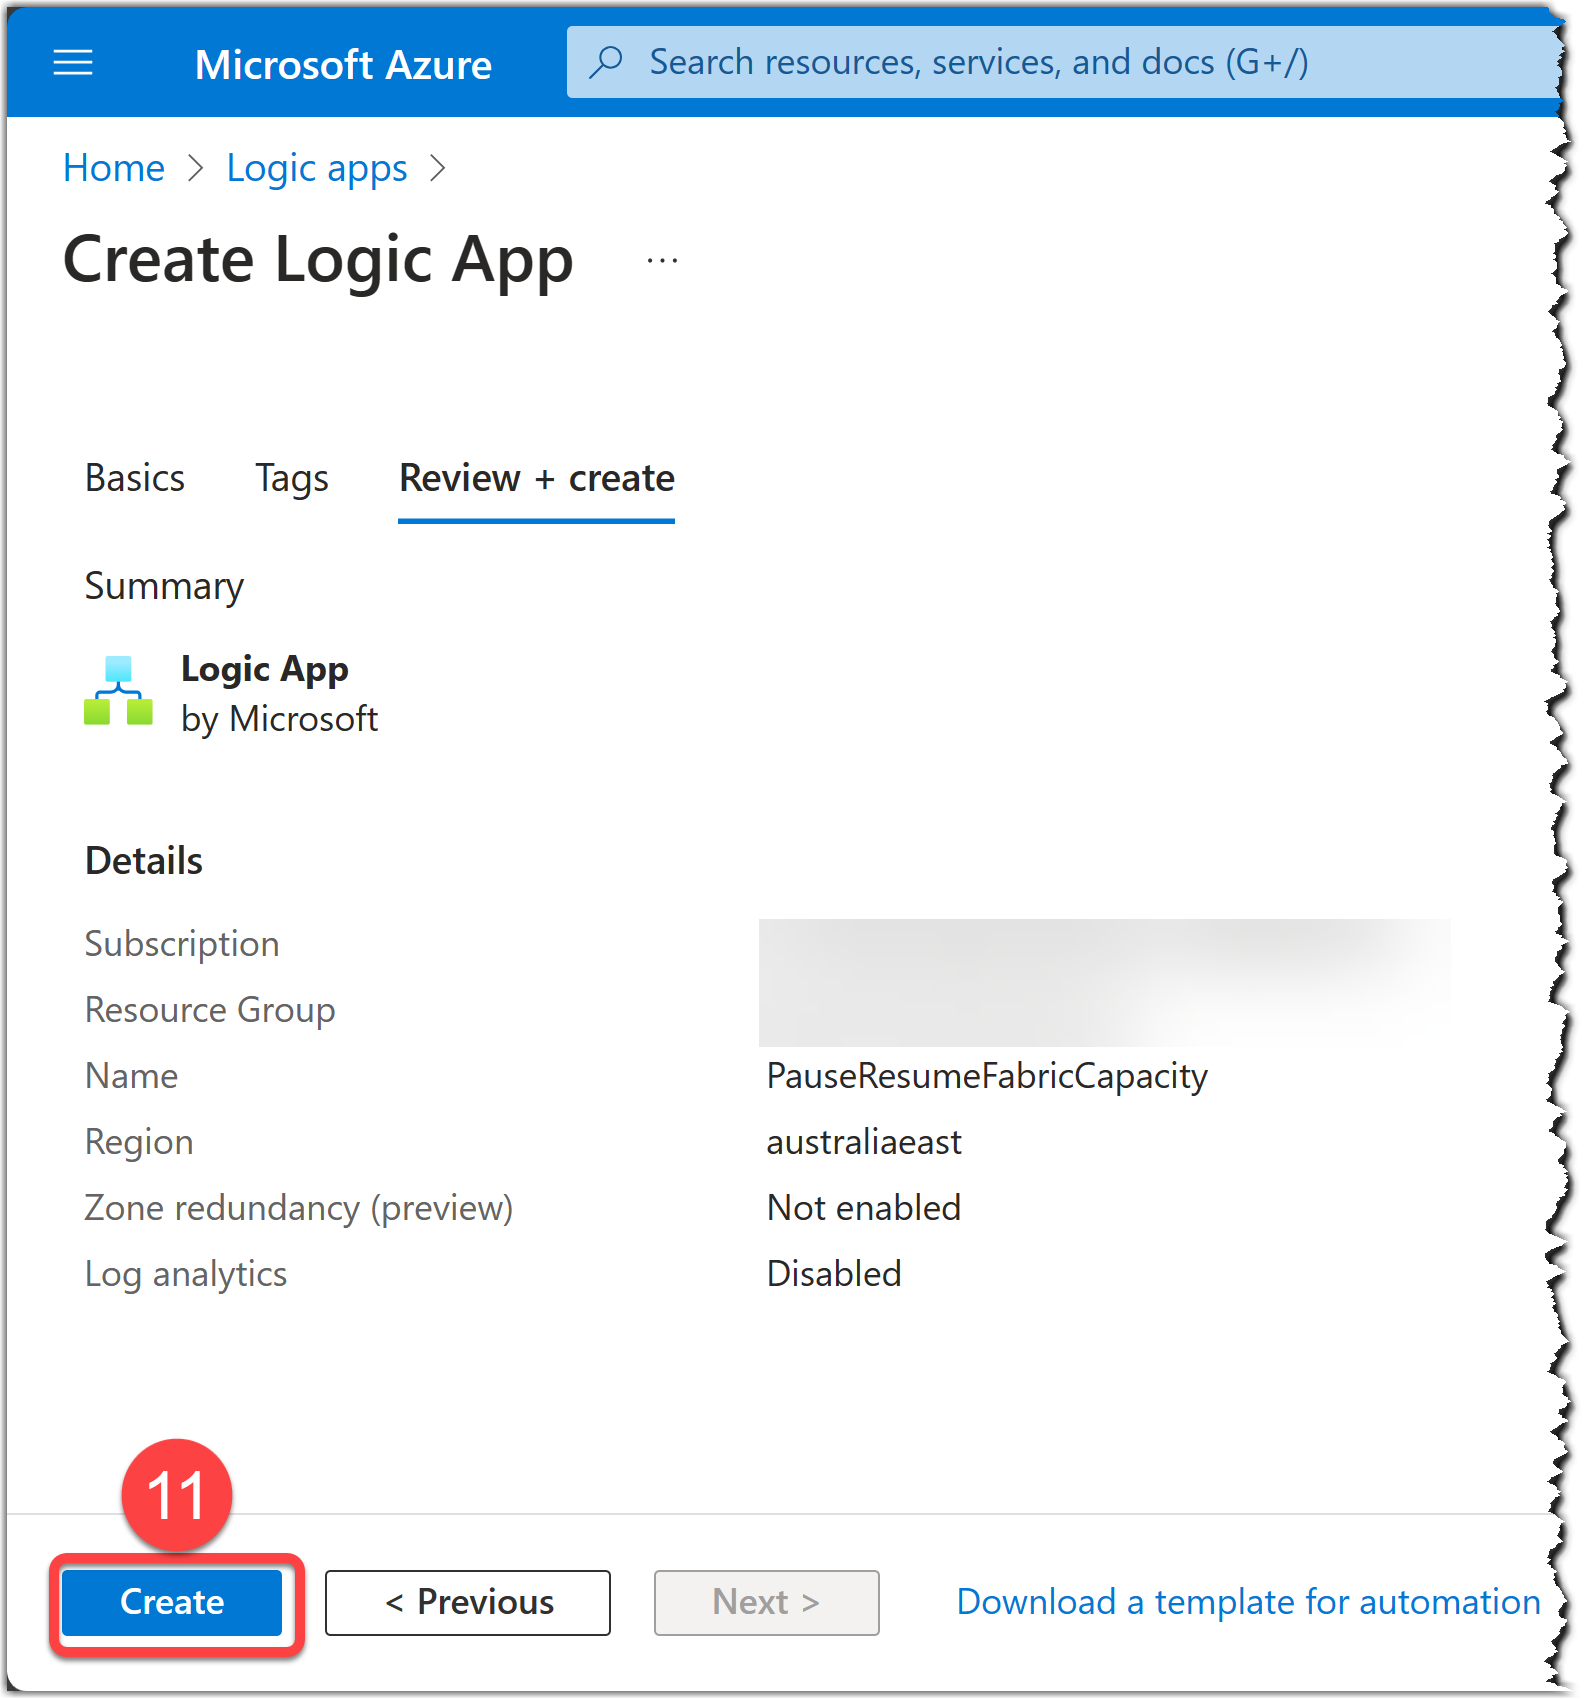 Review configuration and create a new Logic App workflow on Azure Portal